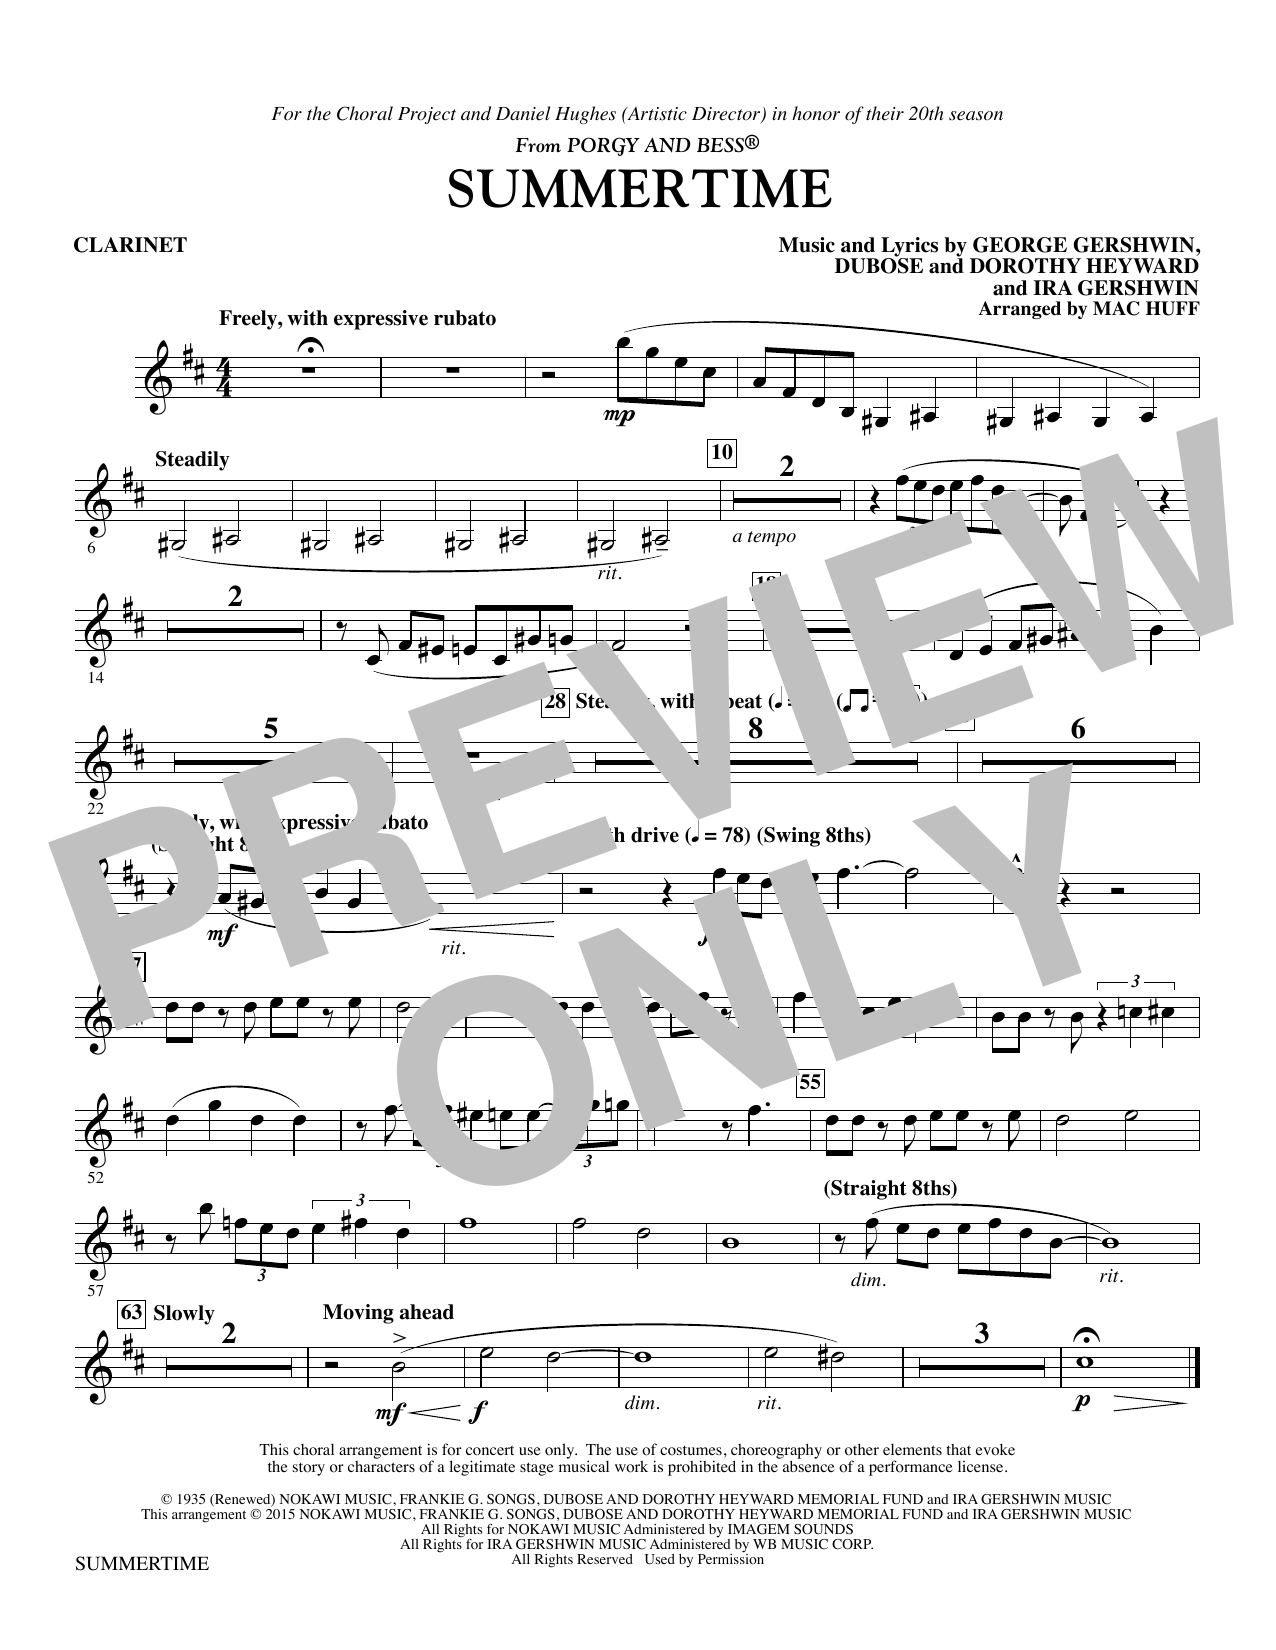 George Gershwin Summertime - Clarinet sheet music notes and chords. Download Printable PDF.